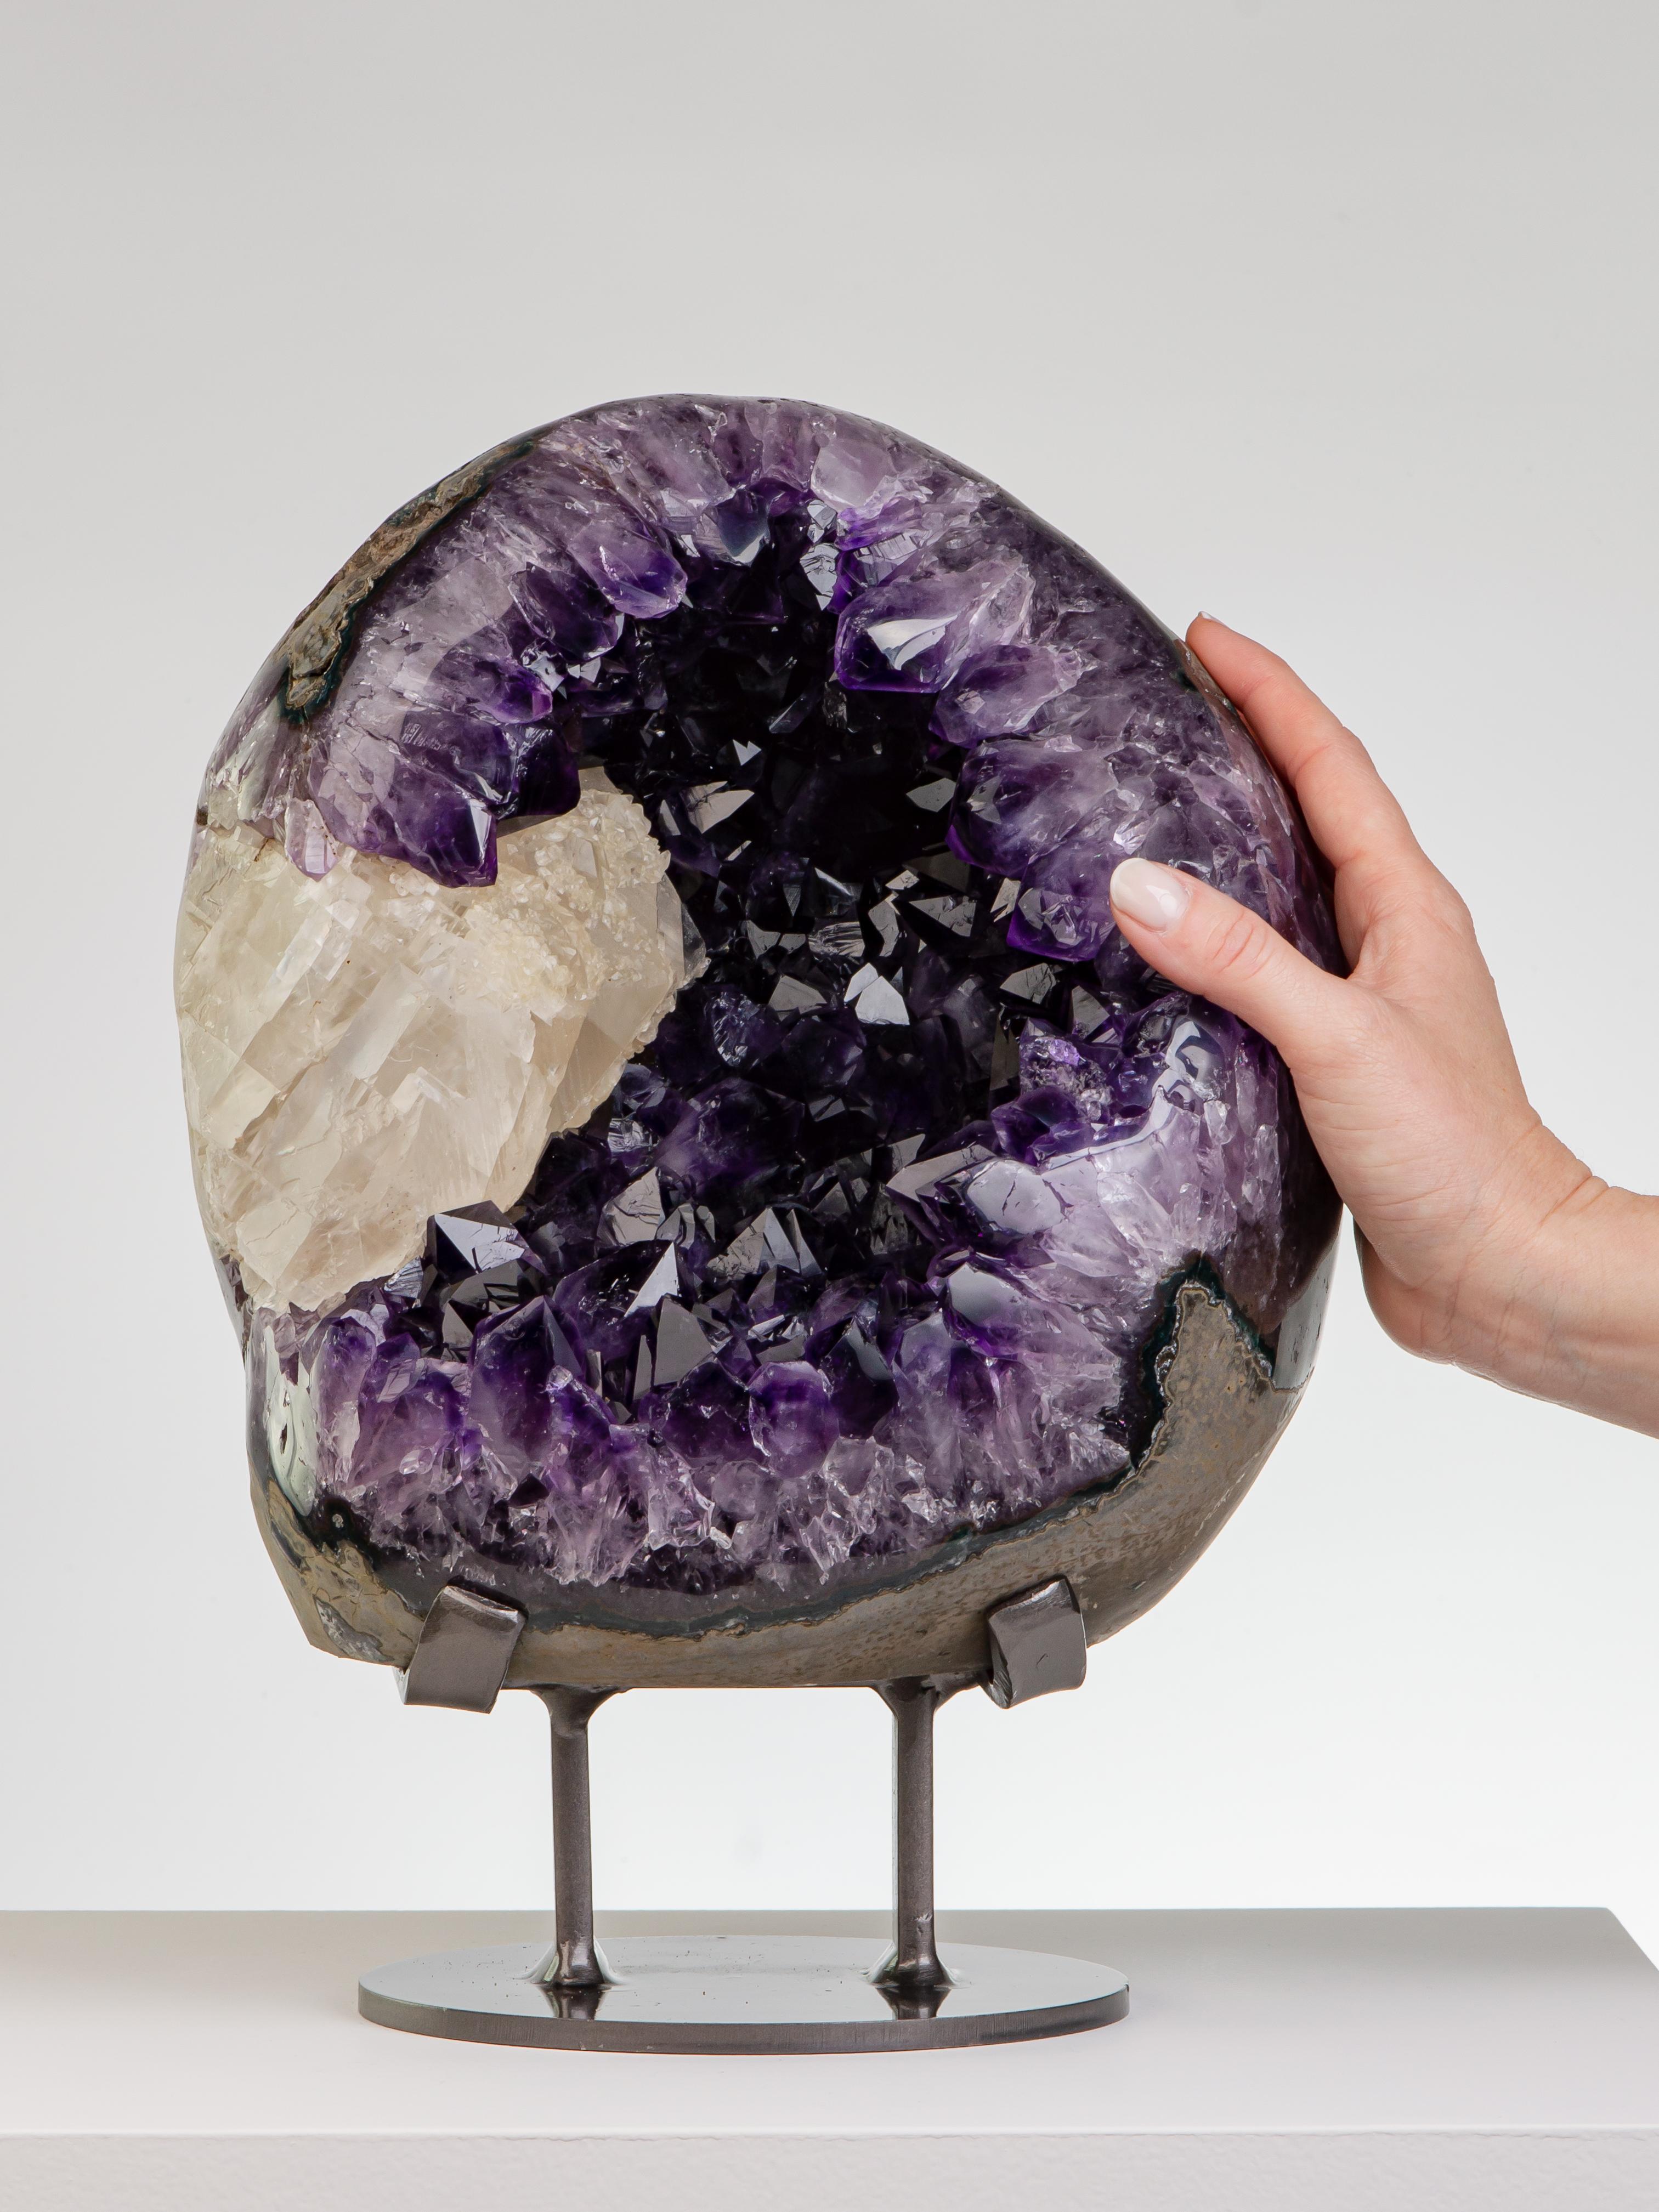 A beautiful mostly complete egg shaped geode with a prominent calcite
to the left, partially polished. The amethyst crystals with high peaks and
of intense purple. The thick amethystine borders polished.

This piece was legally and ethically